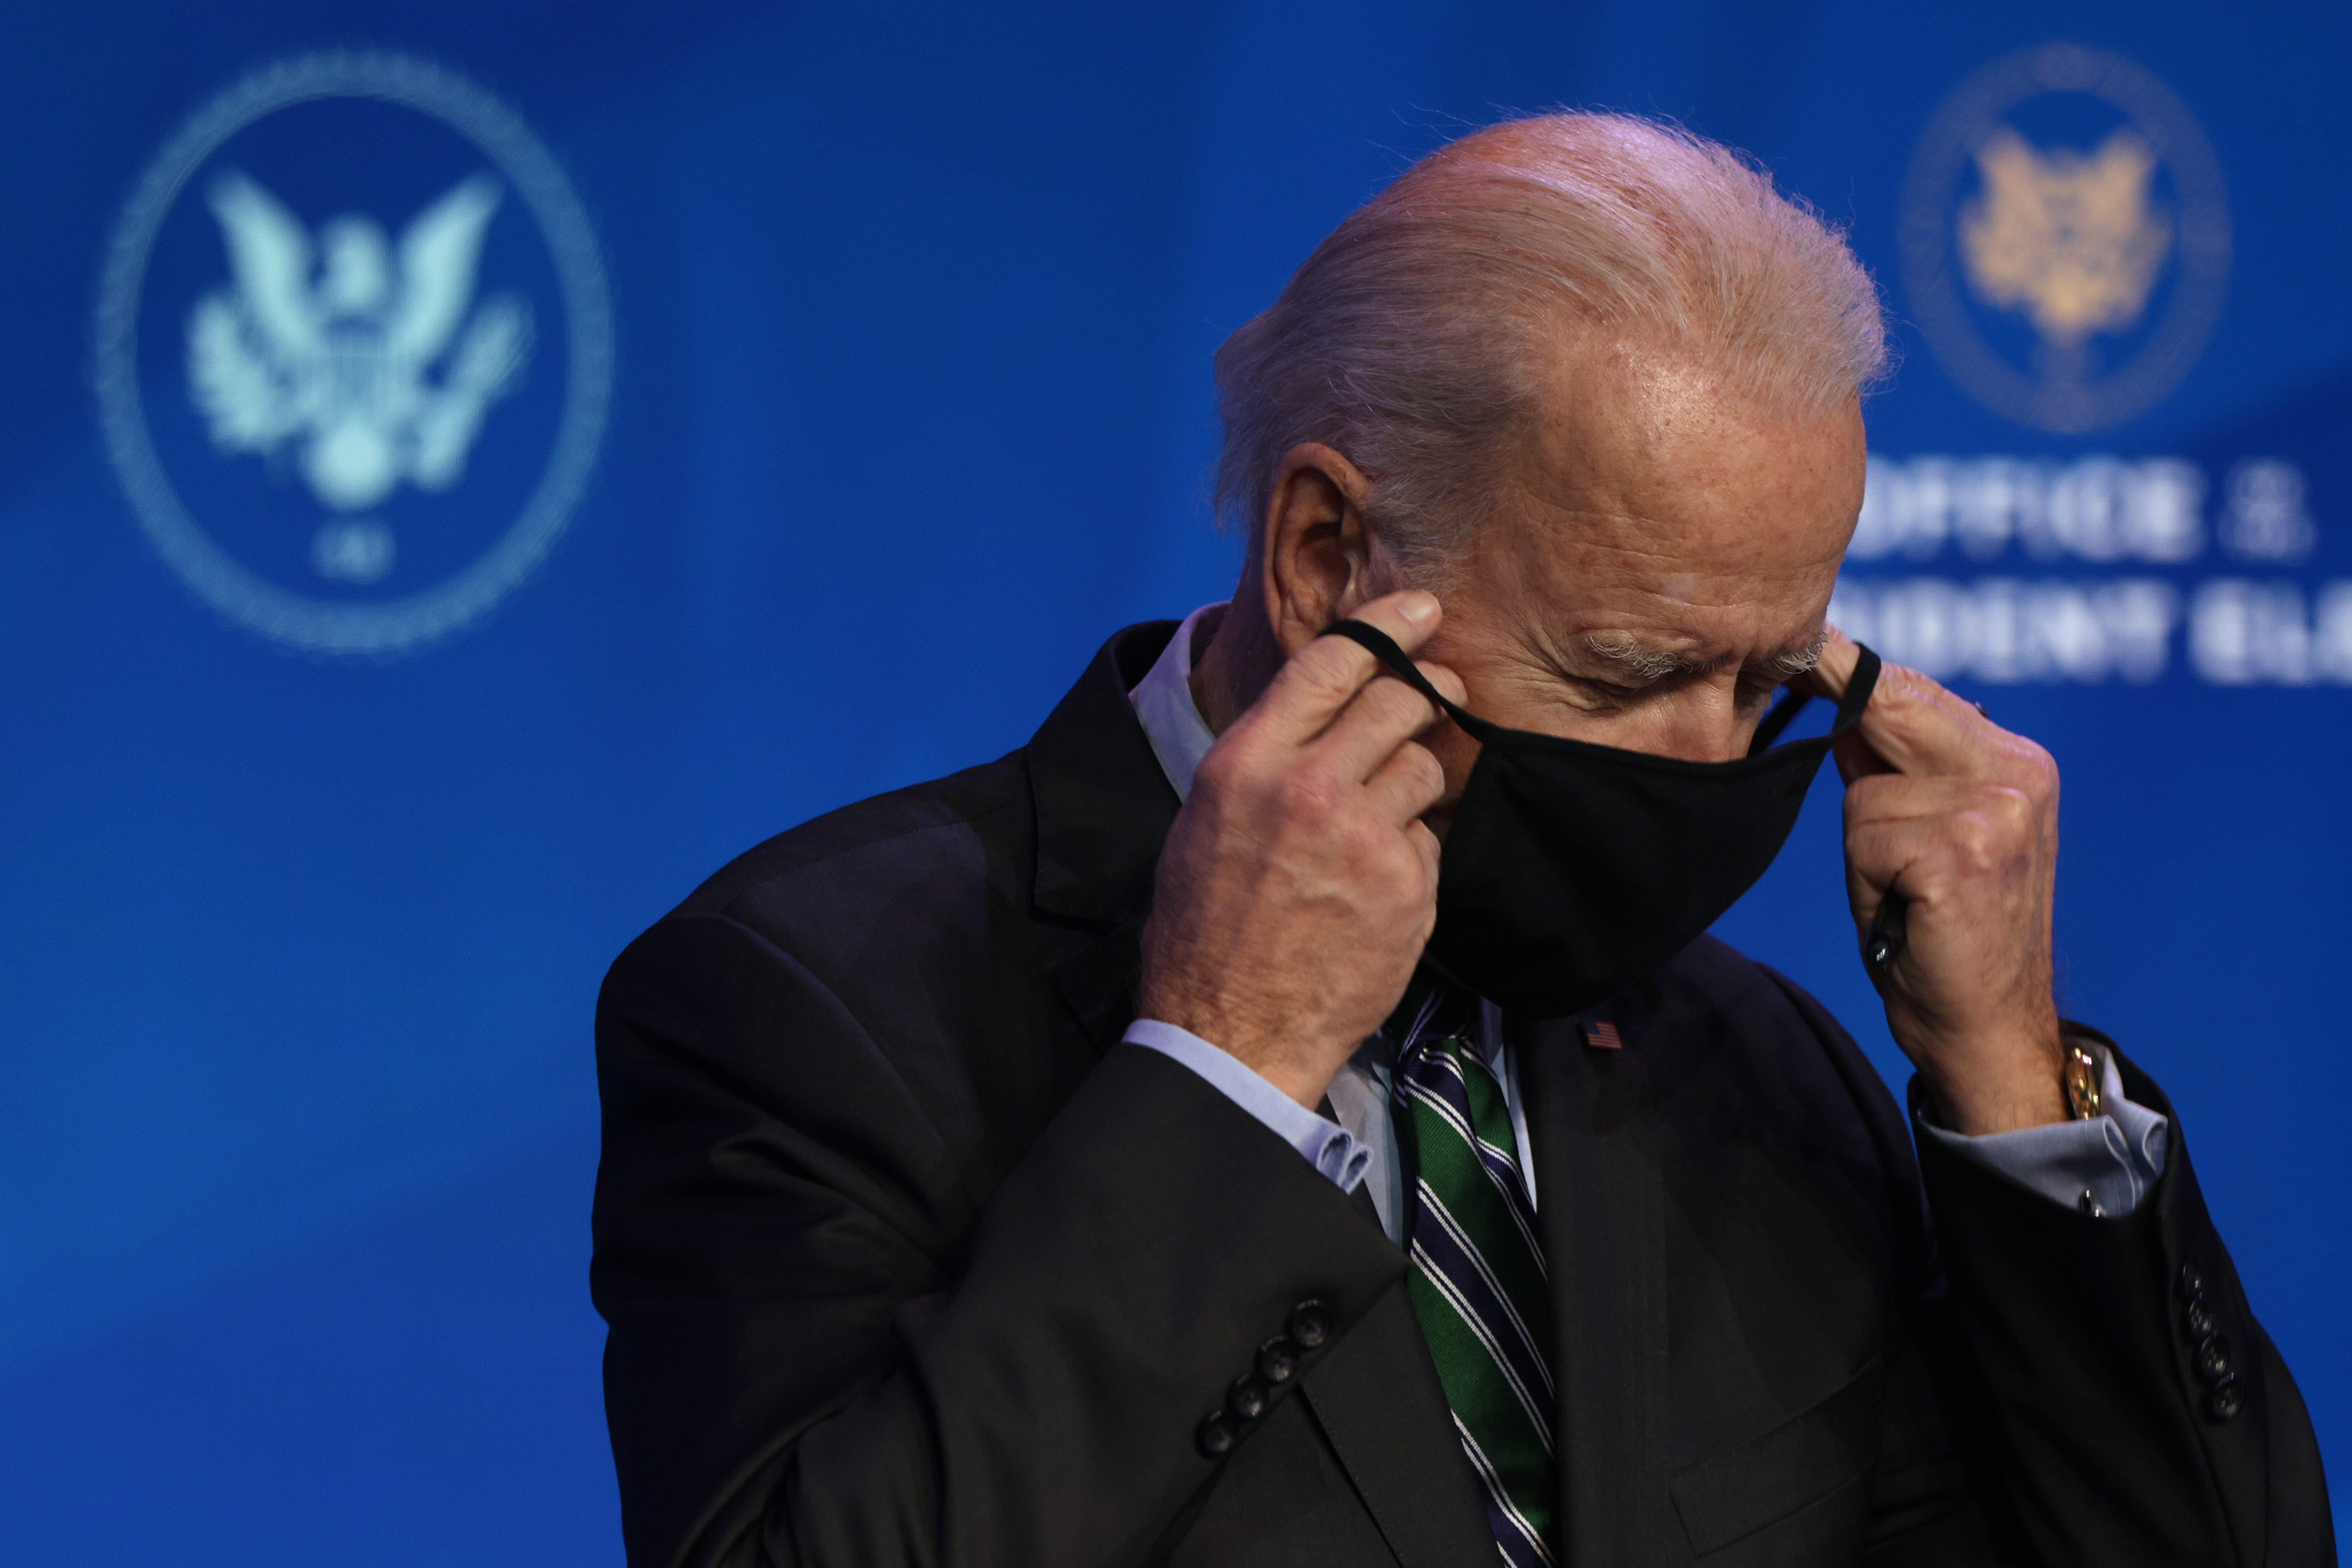 US President-elect Joe Biden puts his mask on after an announcement on Saturday in Wilmington, Delaware.